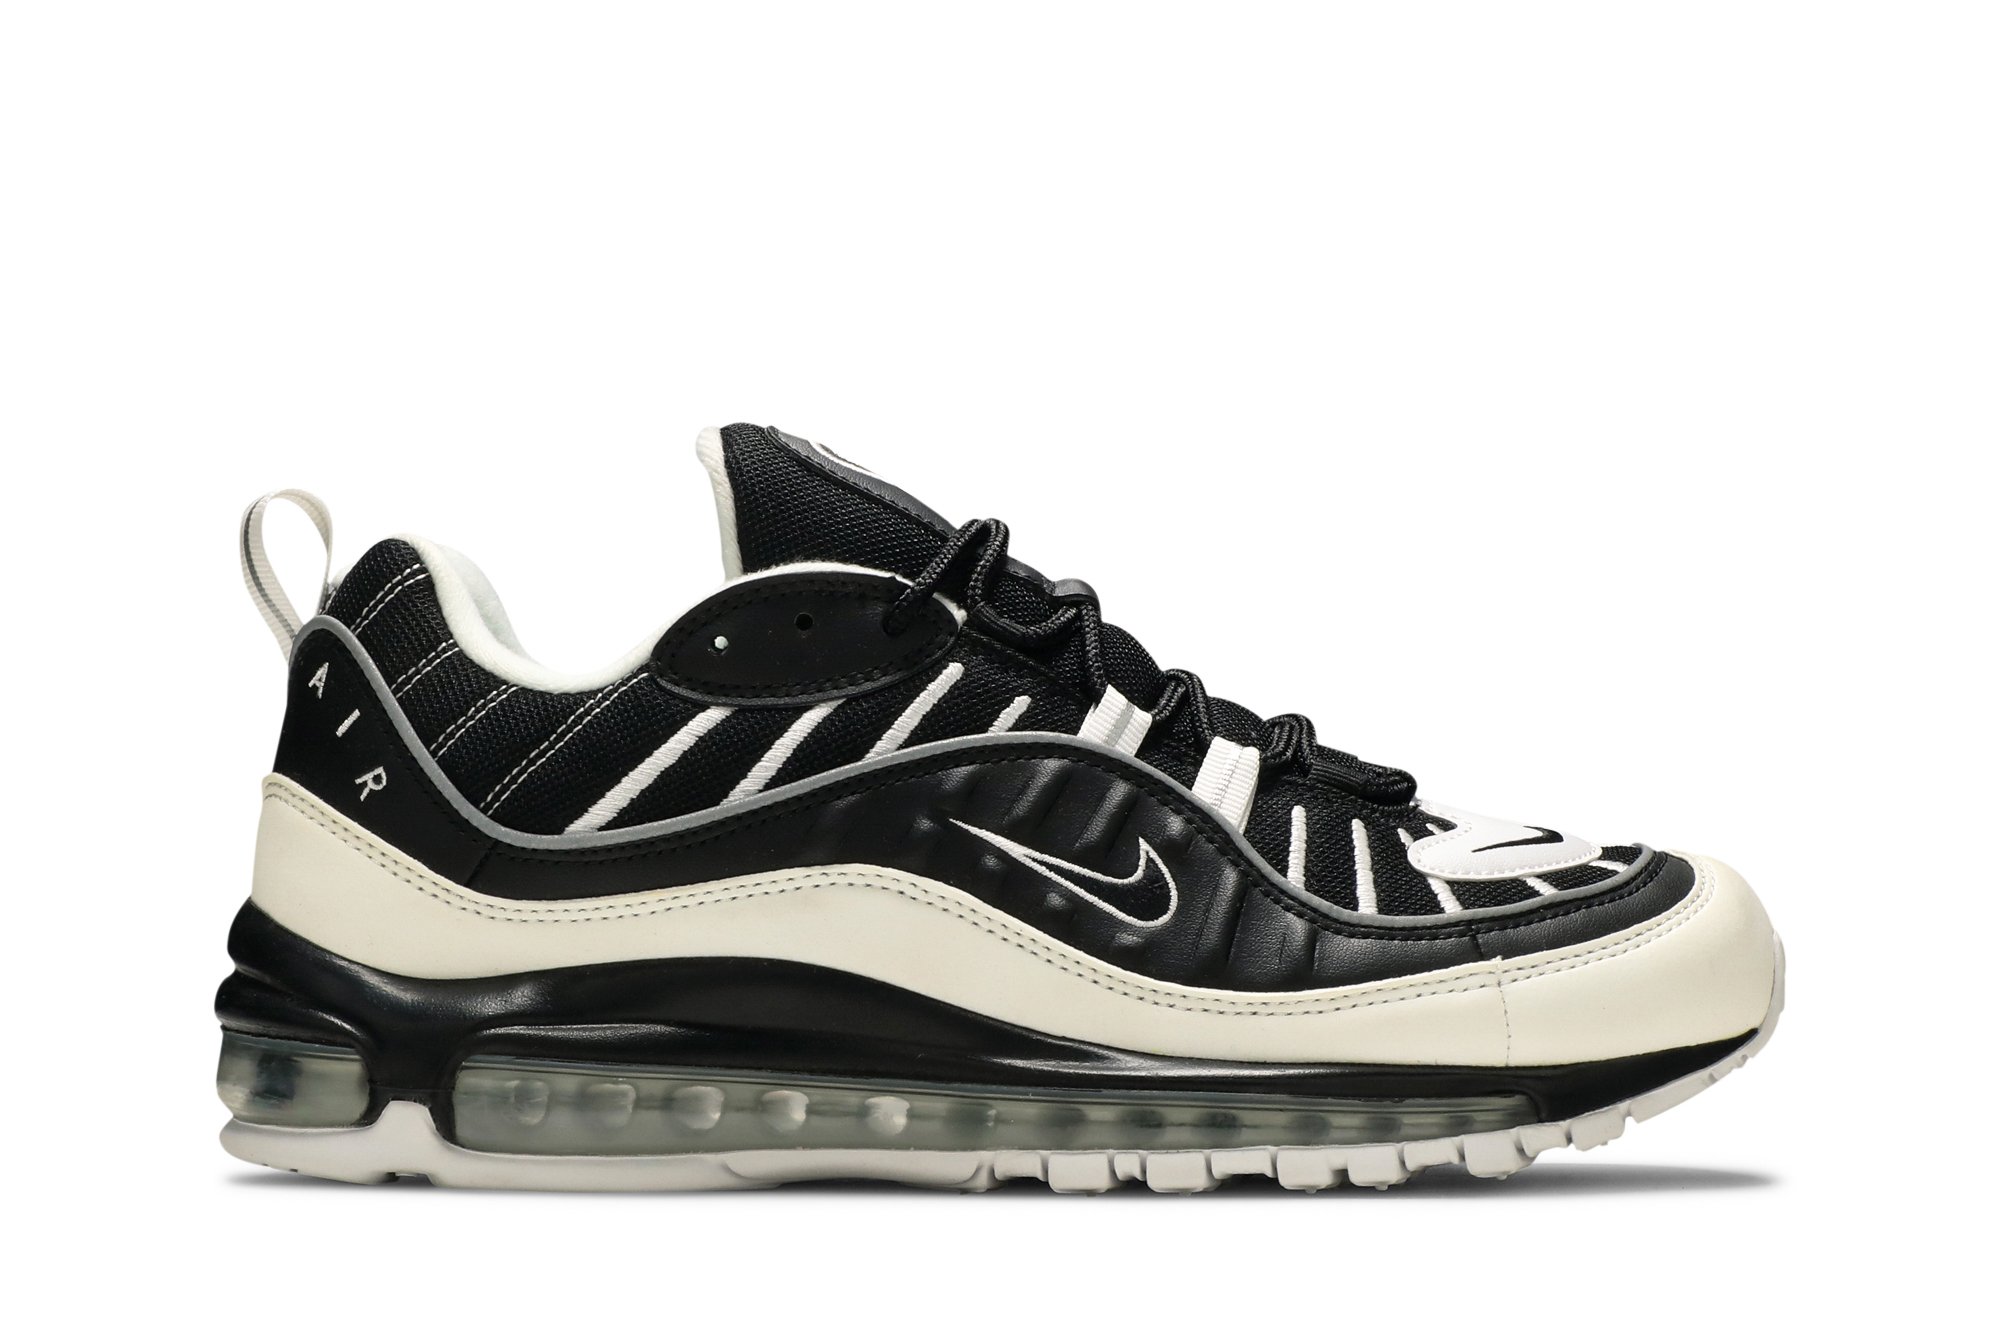 white and black air max 98